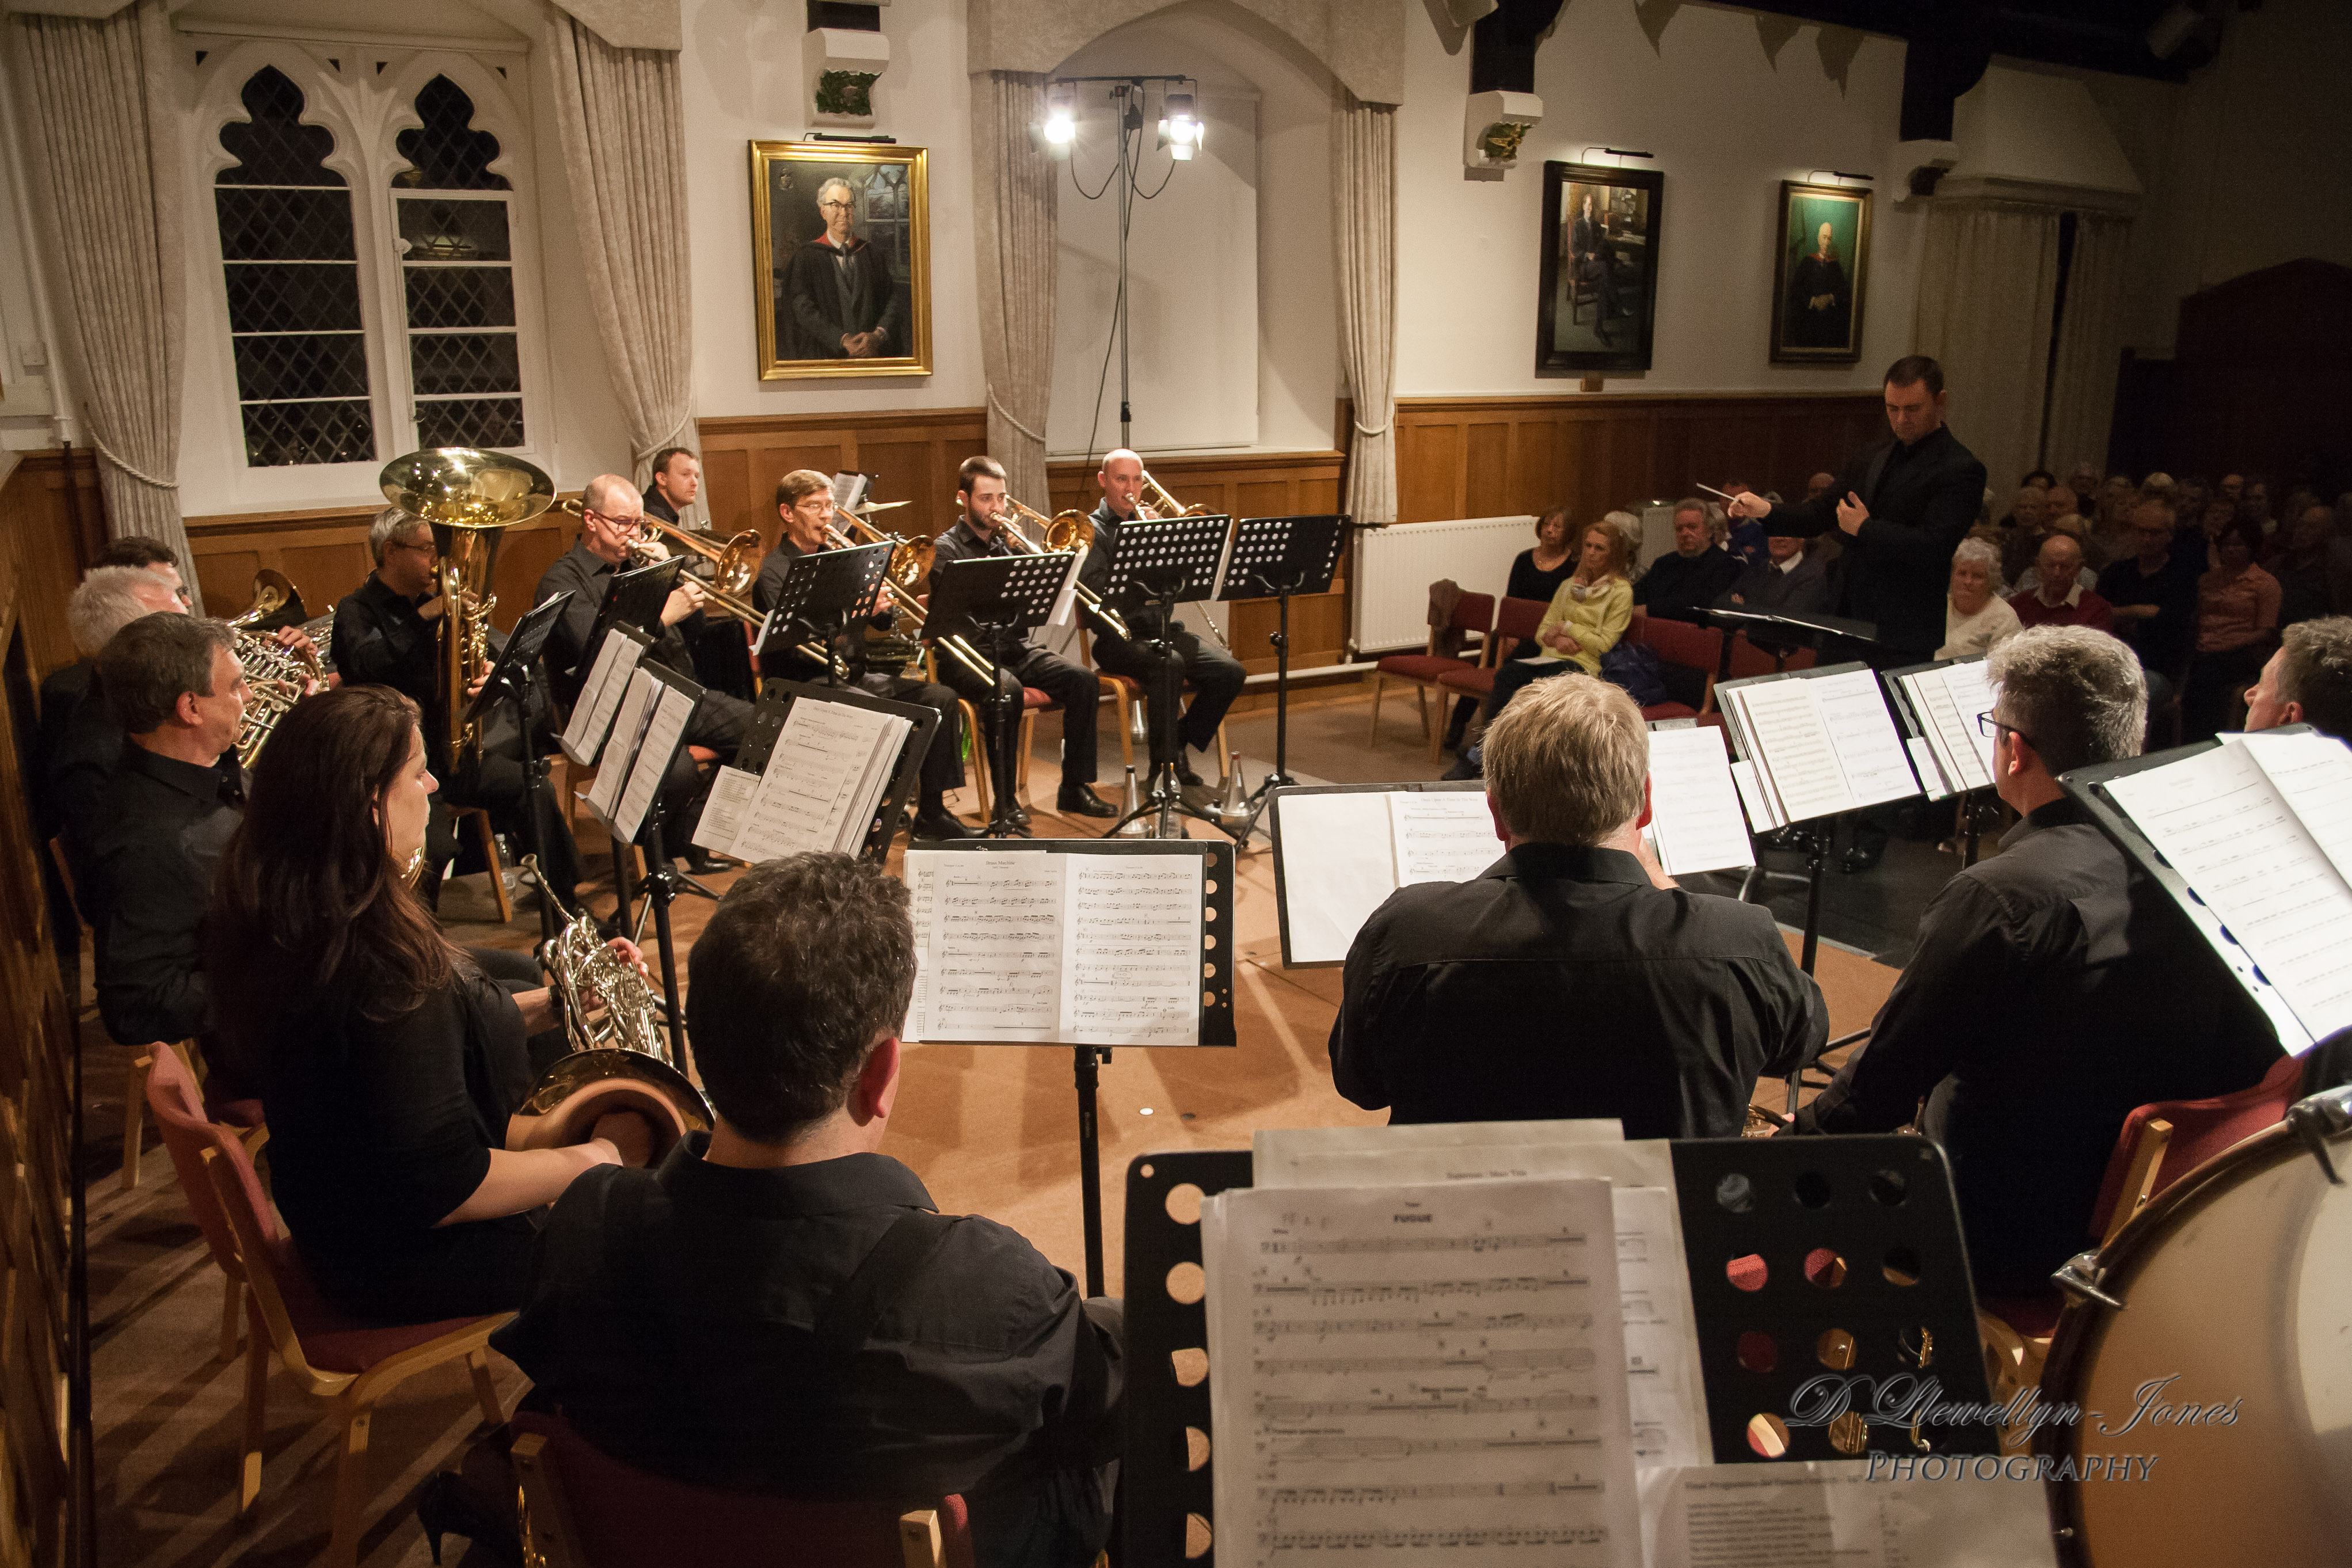 Surrey Brass In Concert raising funds for Age Concern in 2016 at Epsom College: Photo by D.Llewellyn Jones